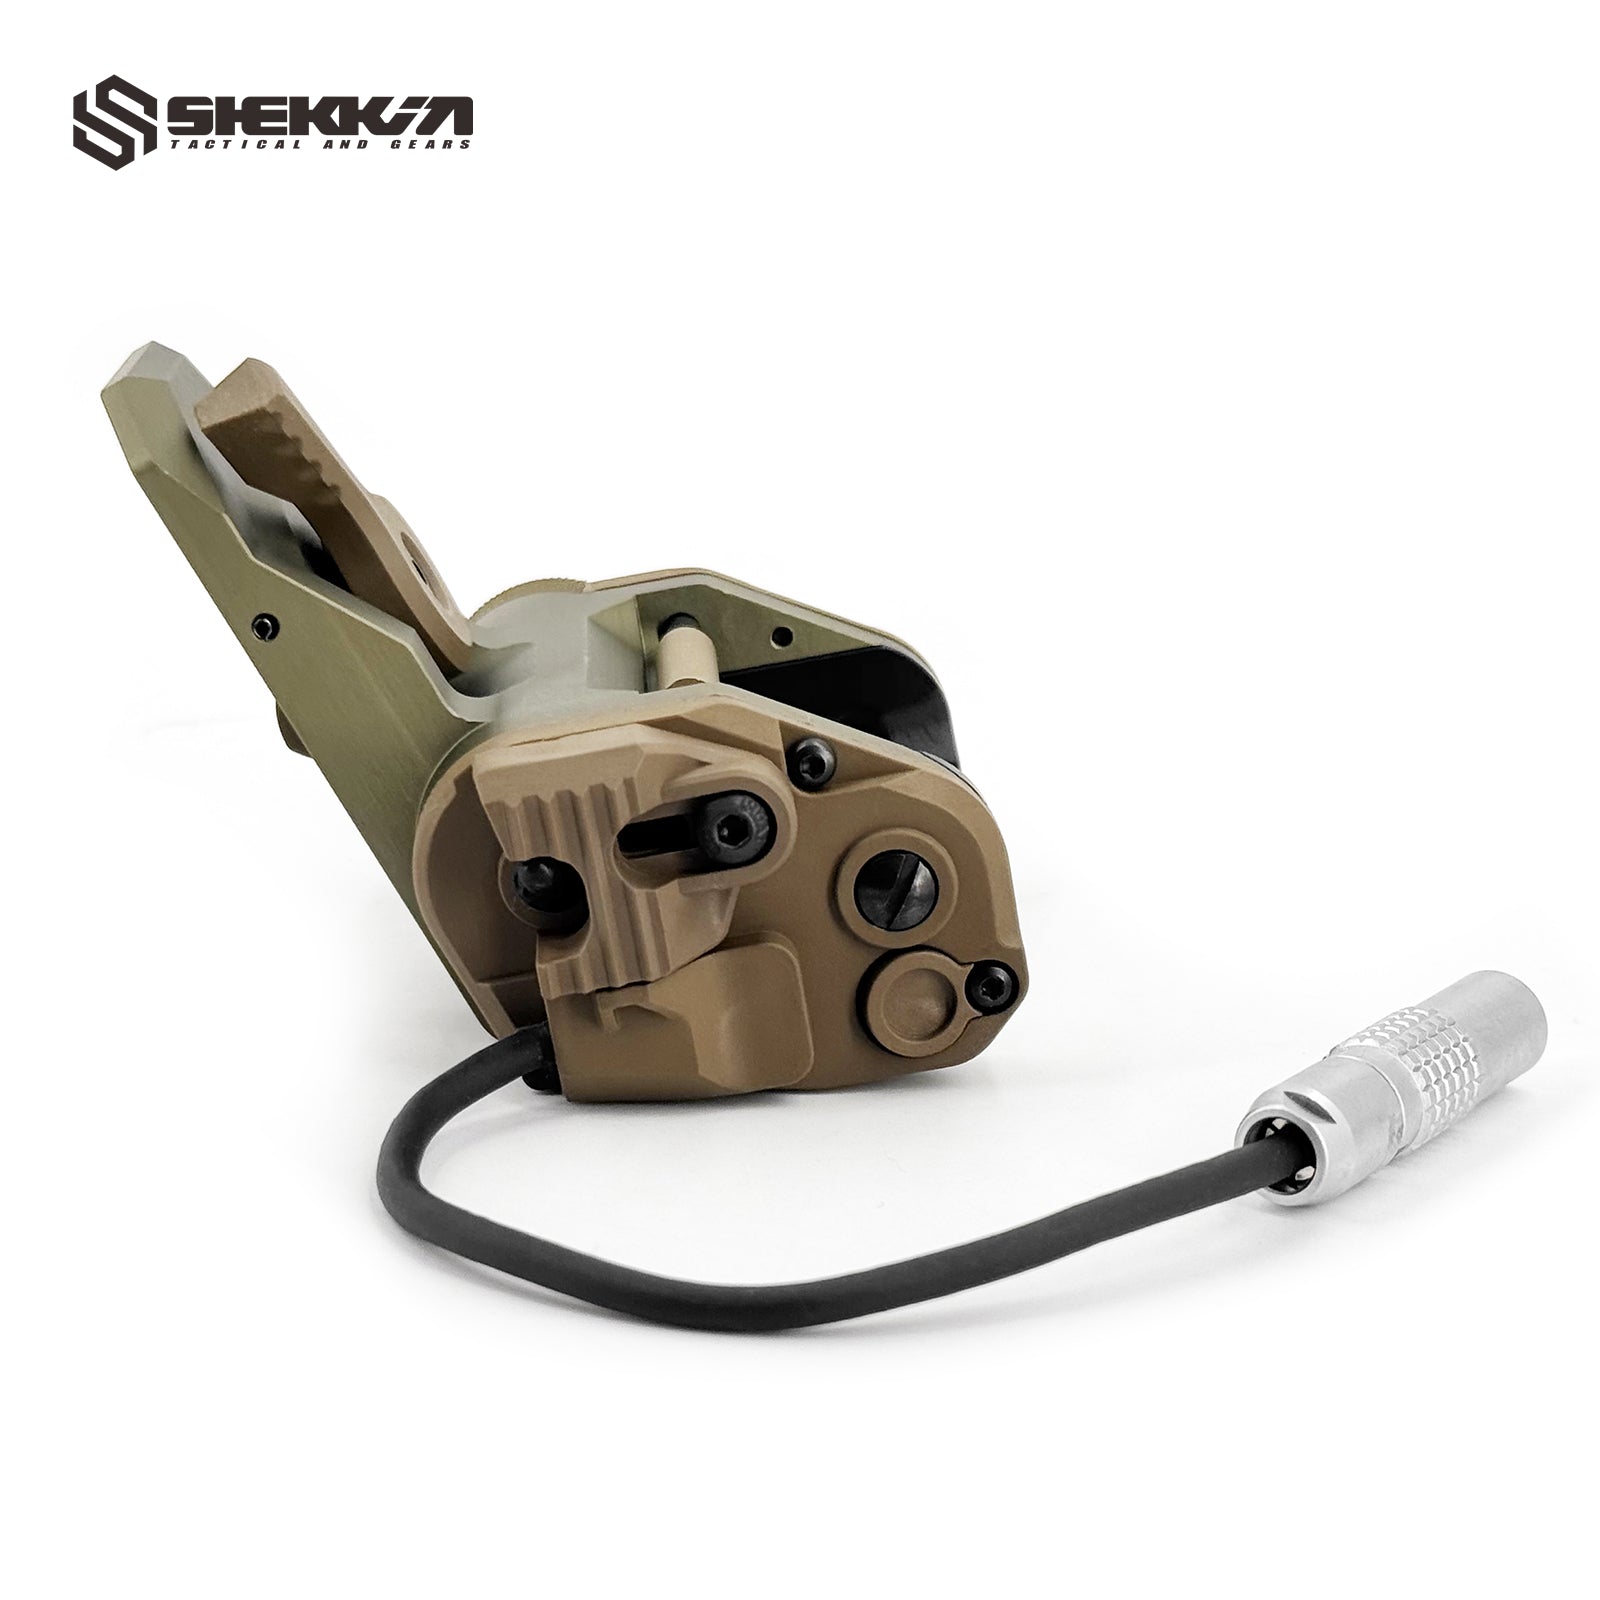 GSGM Helmet NVG Mount With Function